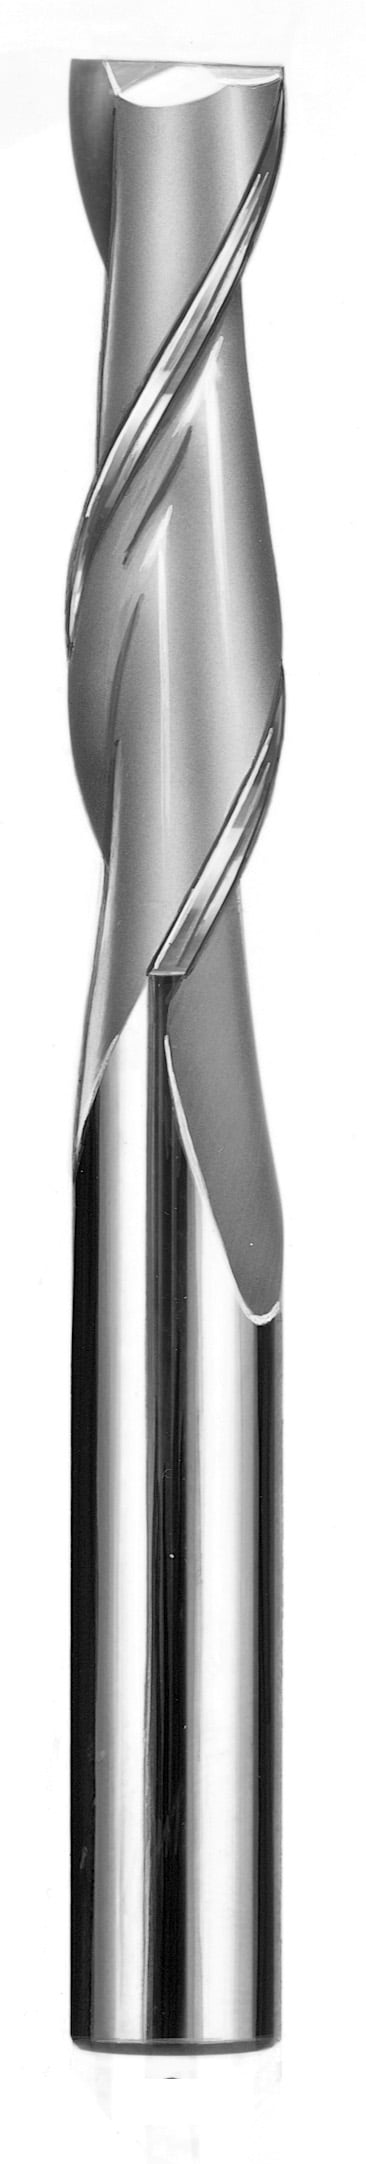 1/8" Dia, 2 Flute, Square End End Mill - 33341